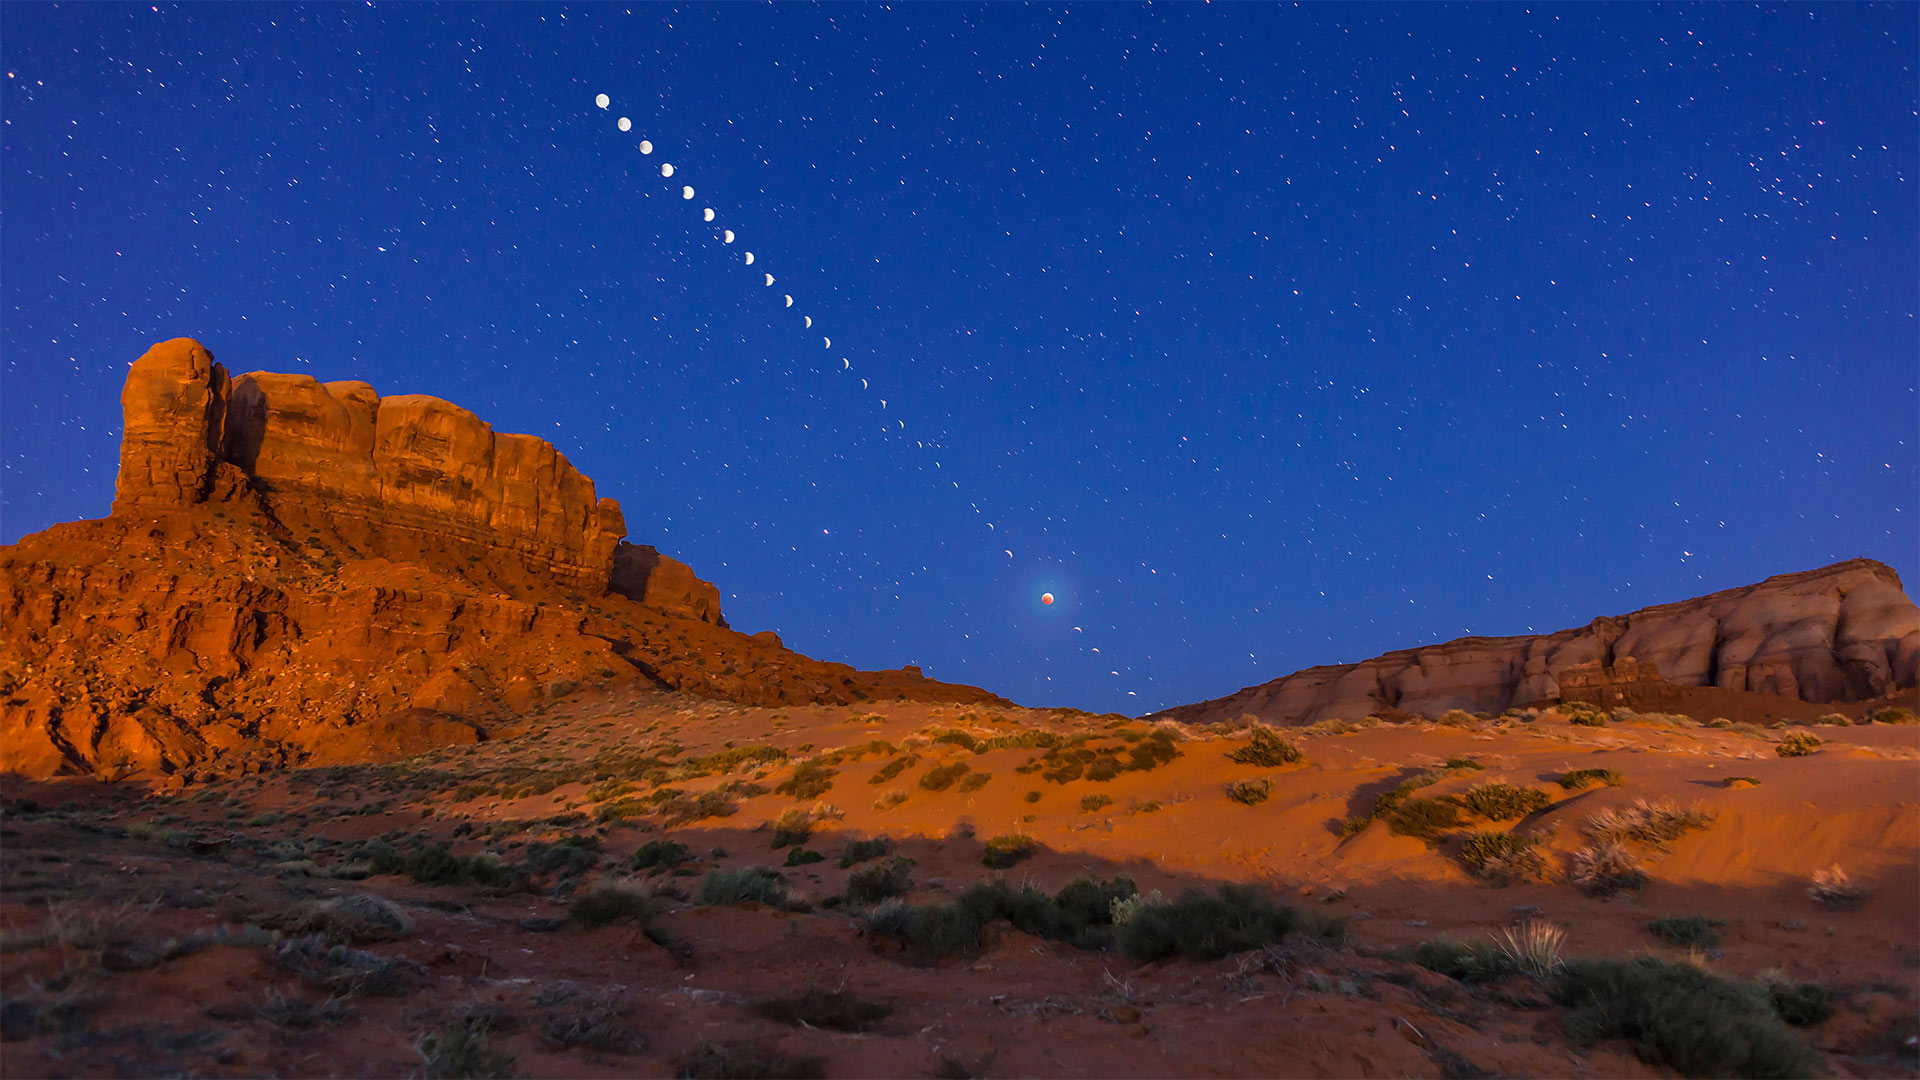 The total lunar eclipse of April 4, 2015, photographed over Monument Valley, Utah - Alan Dyer/Alamy)